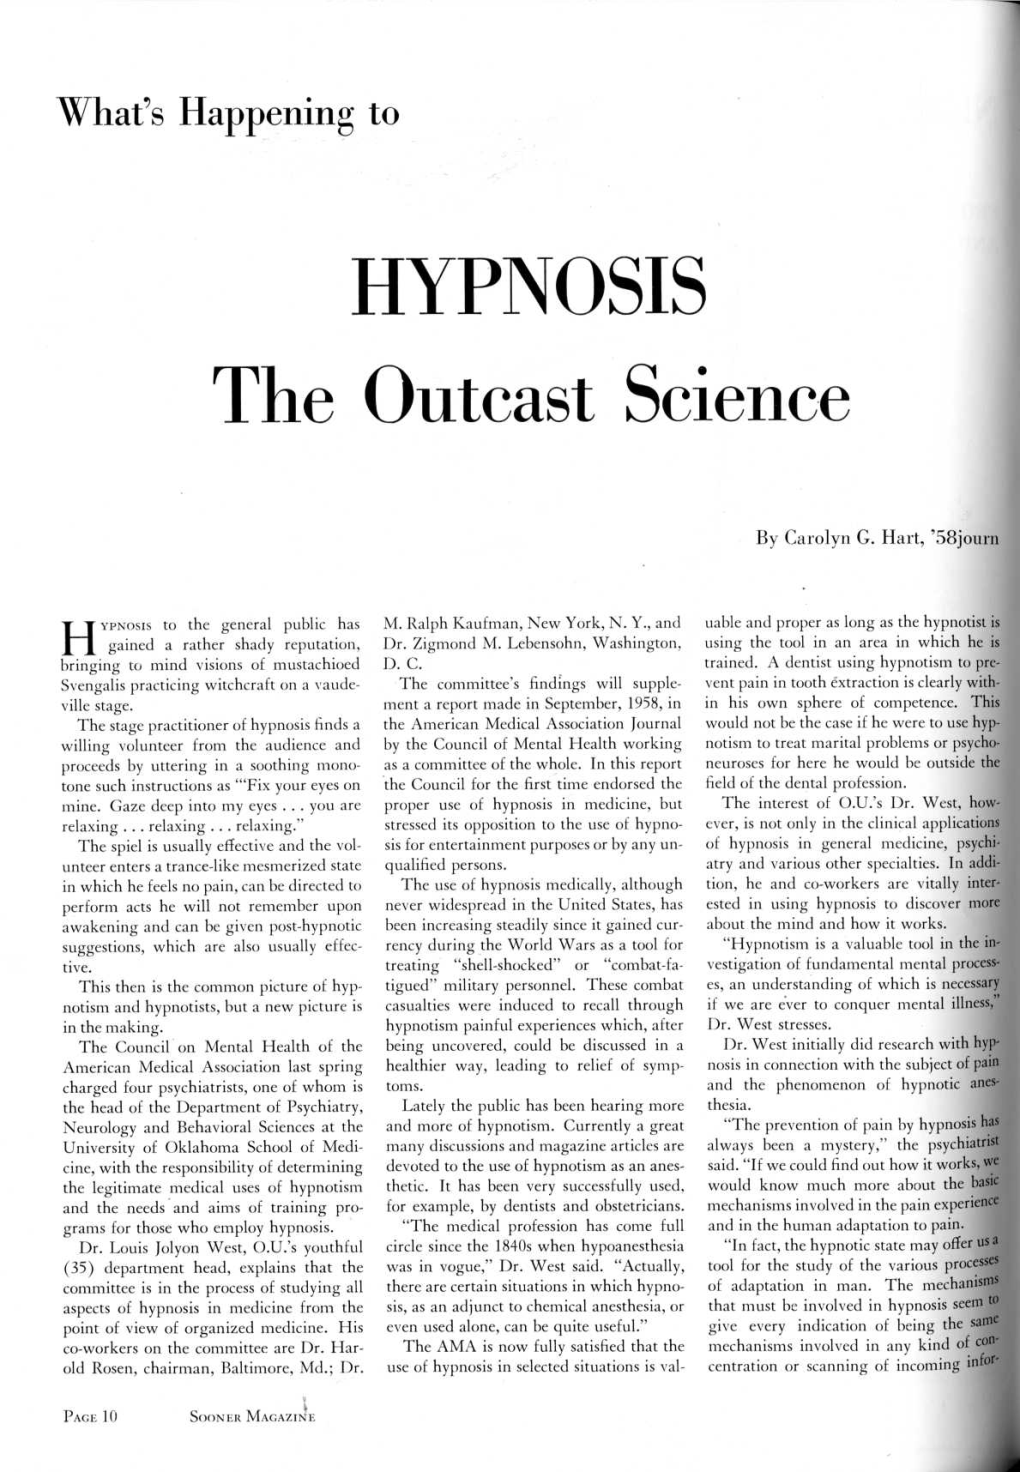 HYPNOSIS the Outcast Science